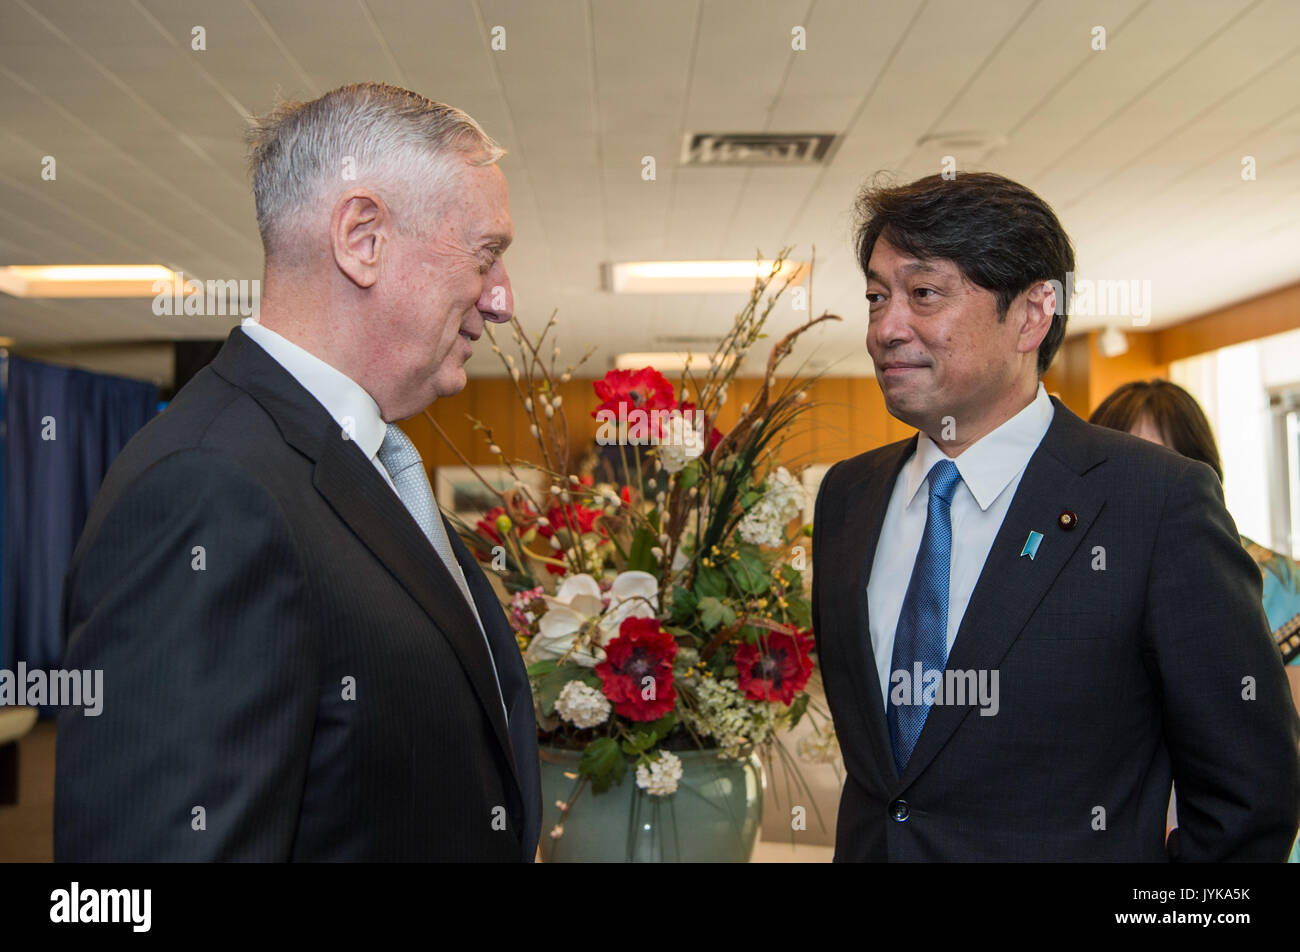 Secretary of Defense Jim Mattis greets Itsunori Onodera, Minister of Defense for Japan, Aug. 16, 2017, at the State Department in Washington, D.C., ahead of a U.S.-Japan Security Consultative Committee meeting. (DOD photo by Air Force Tech. Sgt. Brigitte N. Brantley) Stock Photo